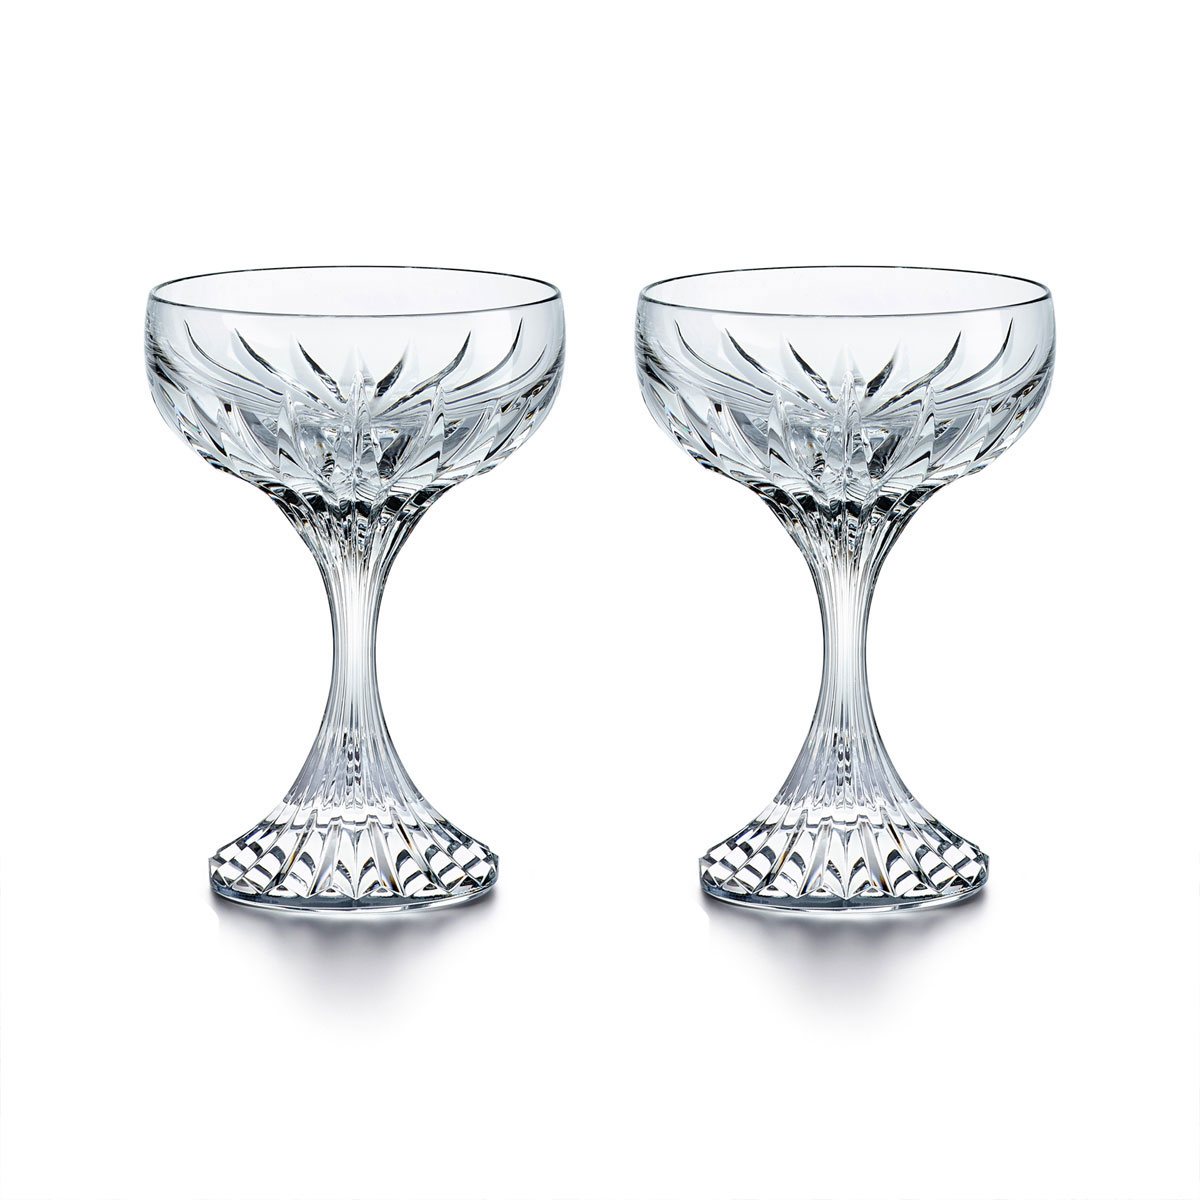 Baccarat Crystal, Massena Champagne Coupe, Pair